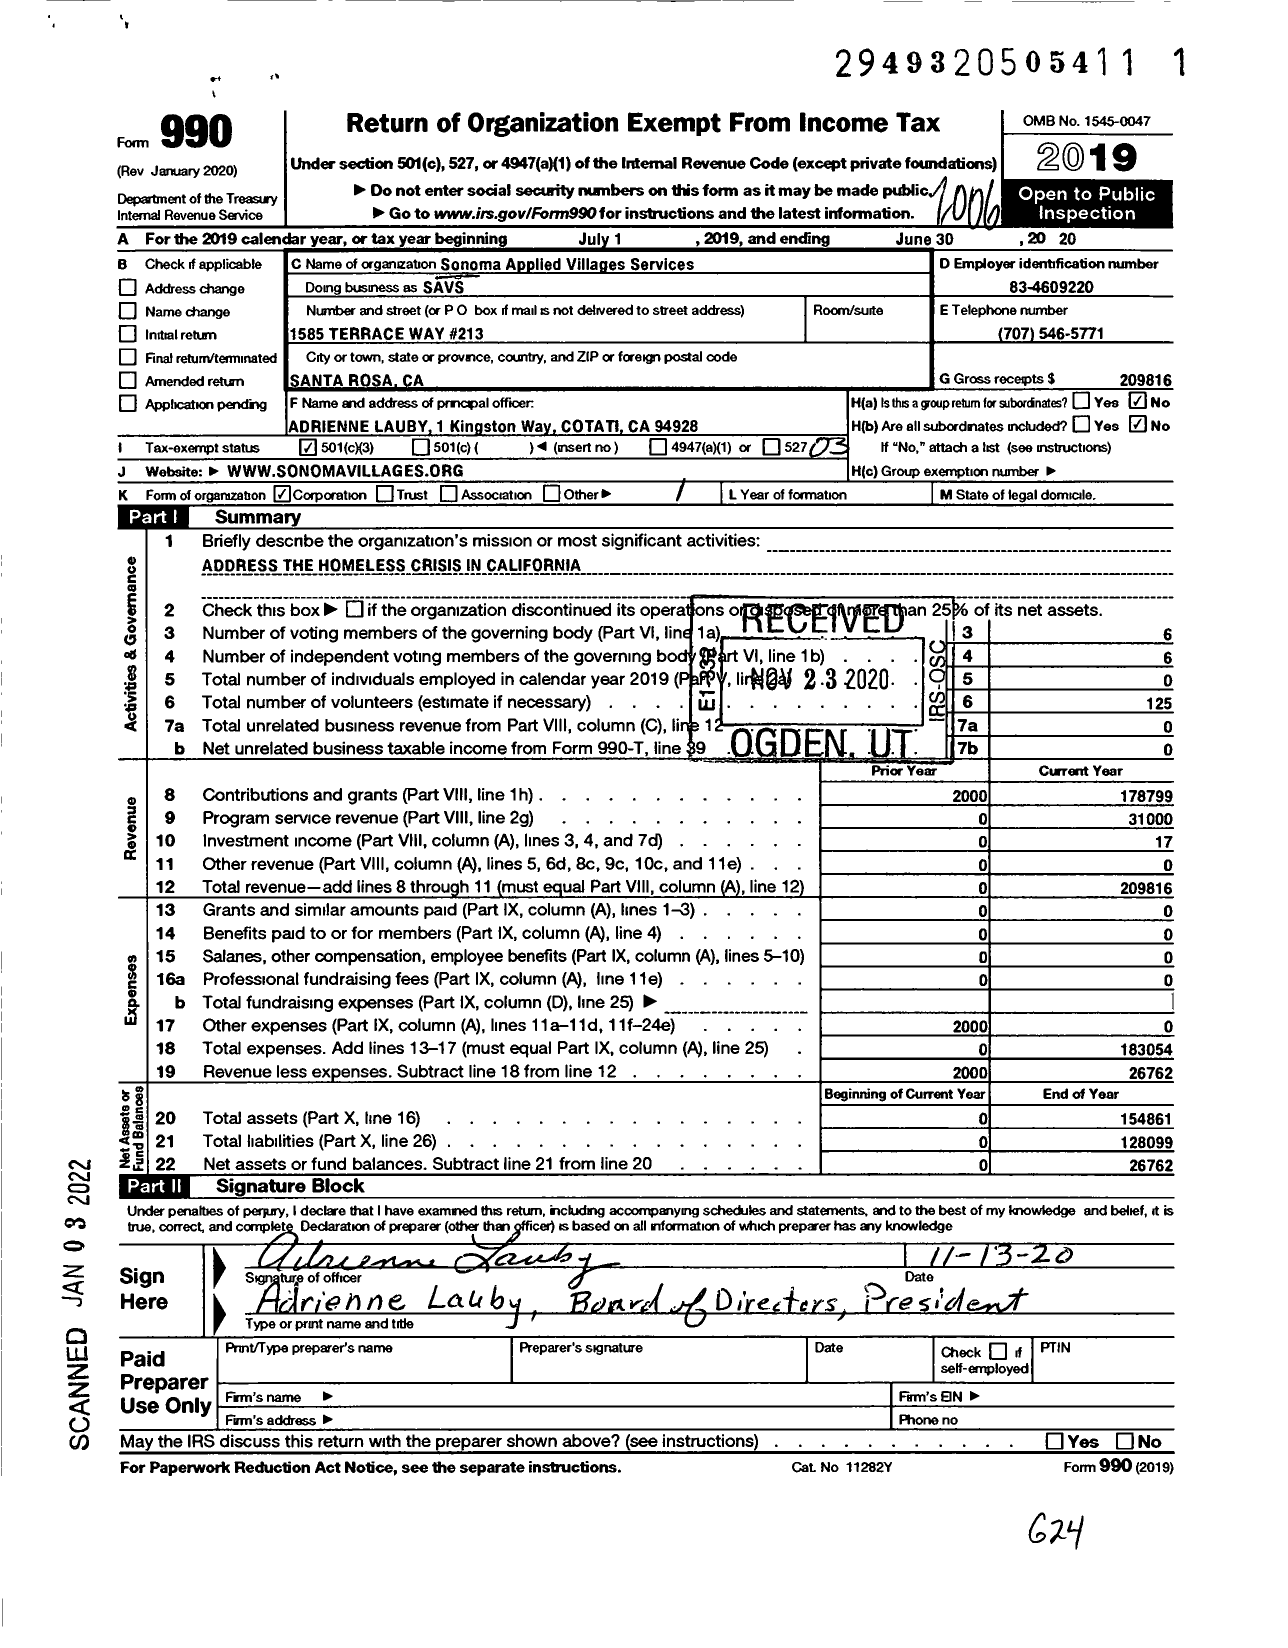 Image of first page of 2019 Form 990 for Sonoma Applied Villages Services